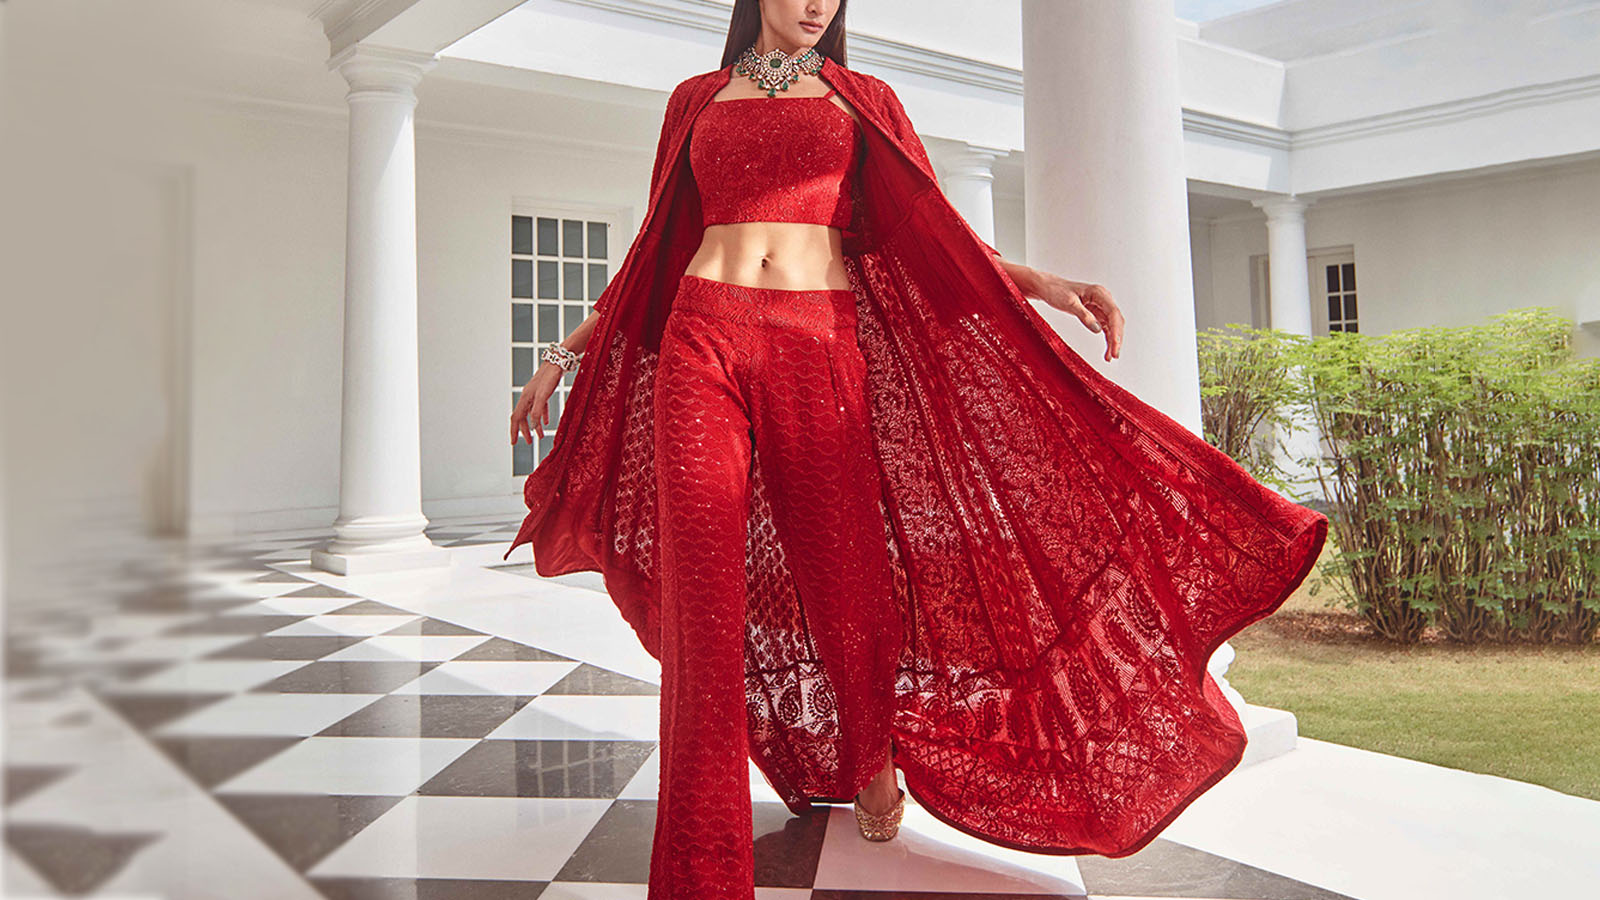 WEDDING TROUSSEAU: A COMPLETE CHECKLIST OF INDIAN DRESSES – Empress Clothing